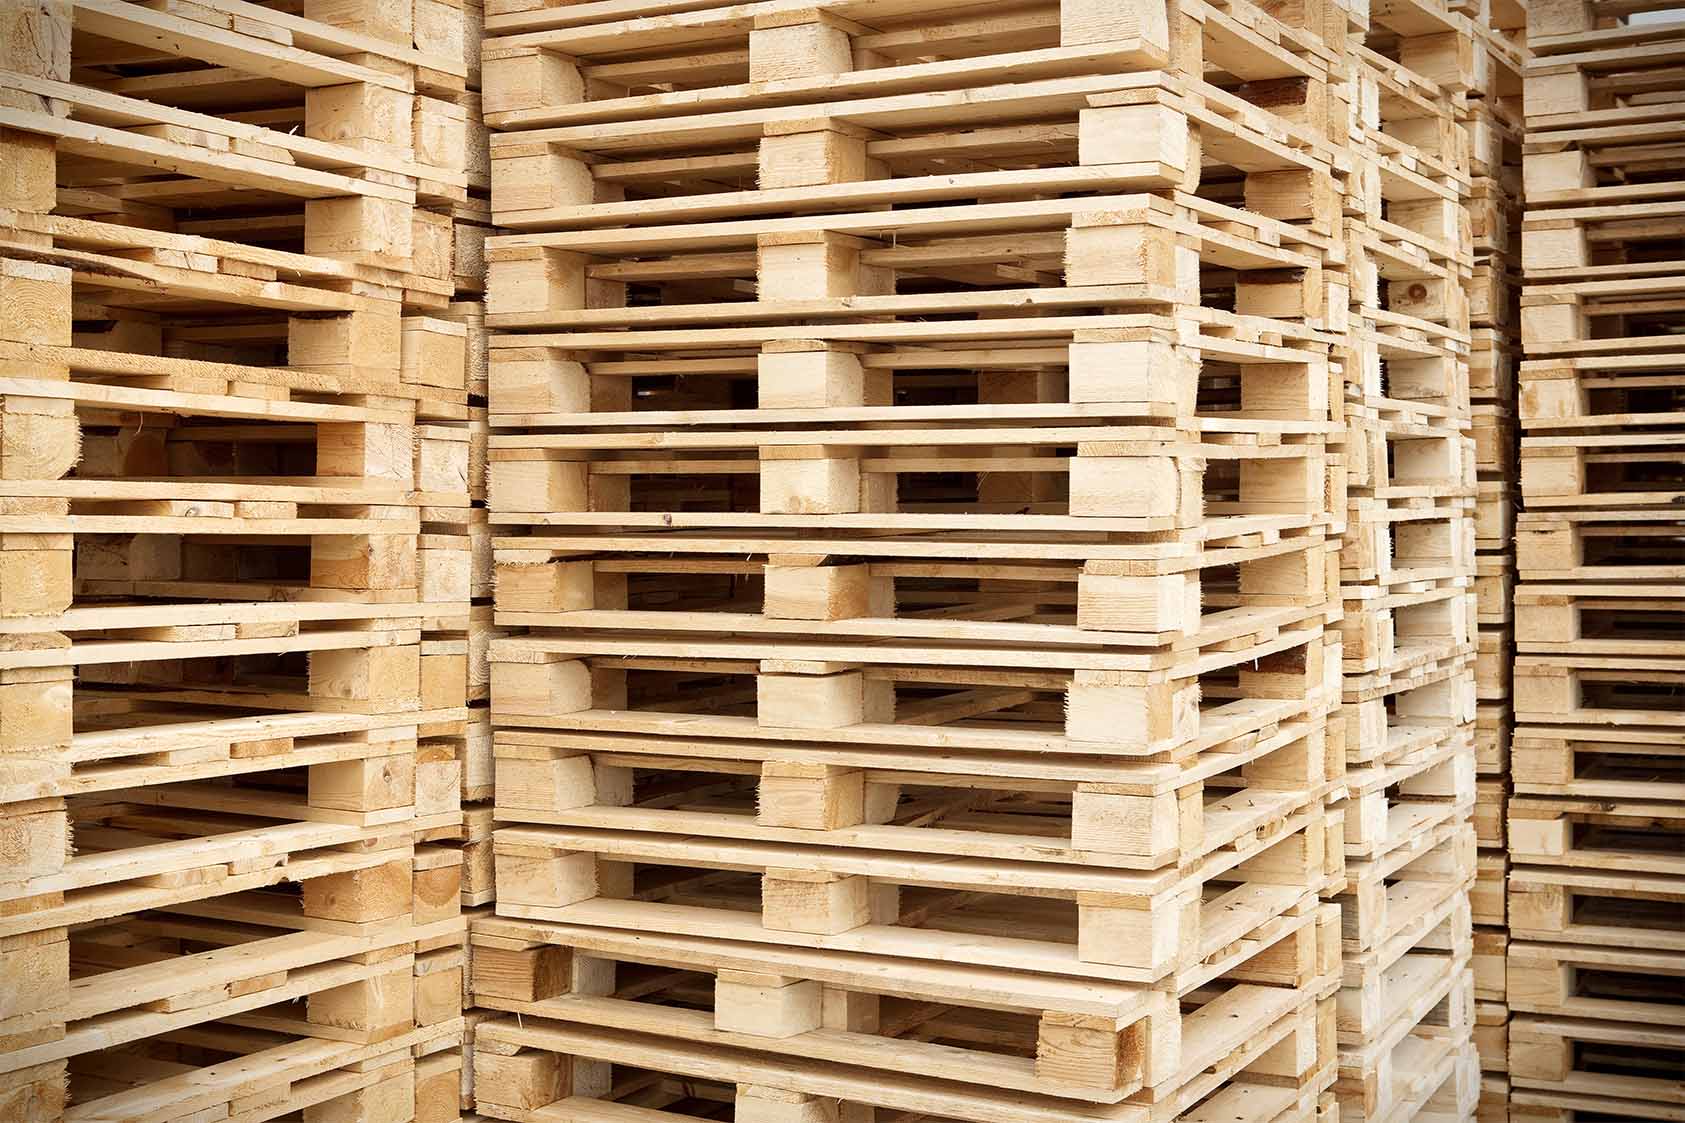 Are Pallets Recyclable? | SL Recycling SL Recycling